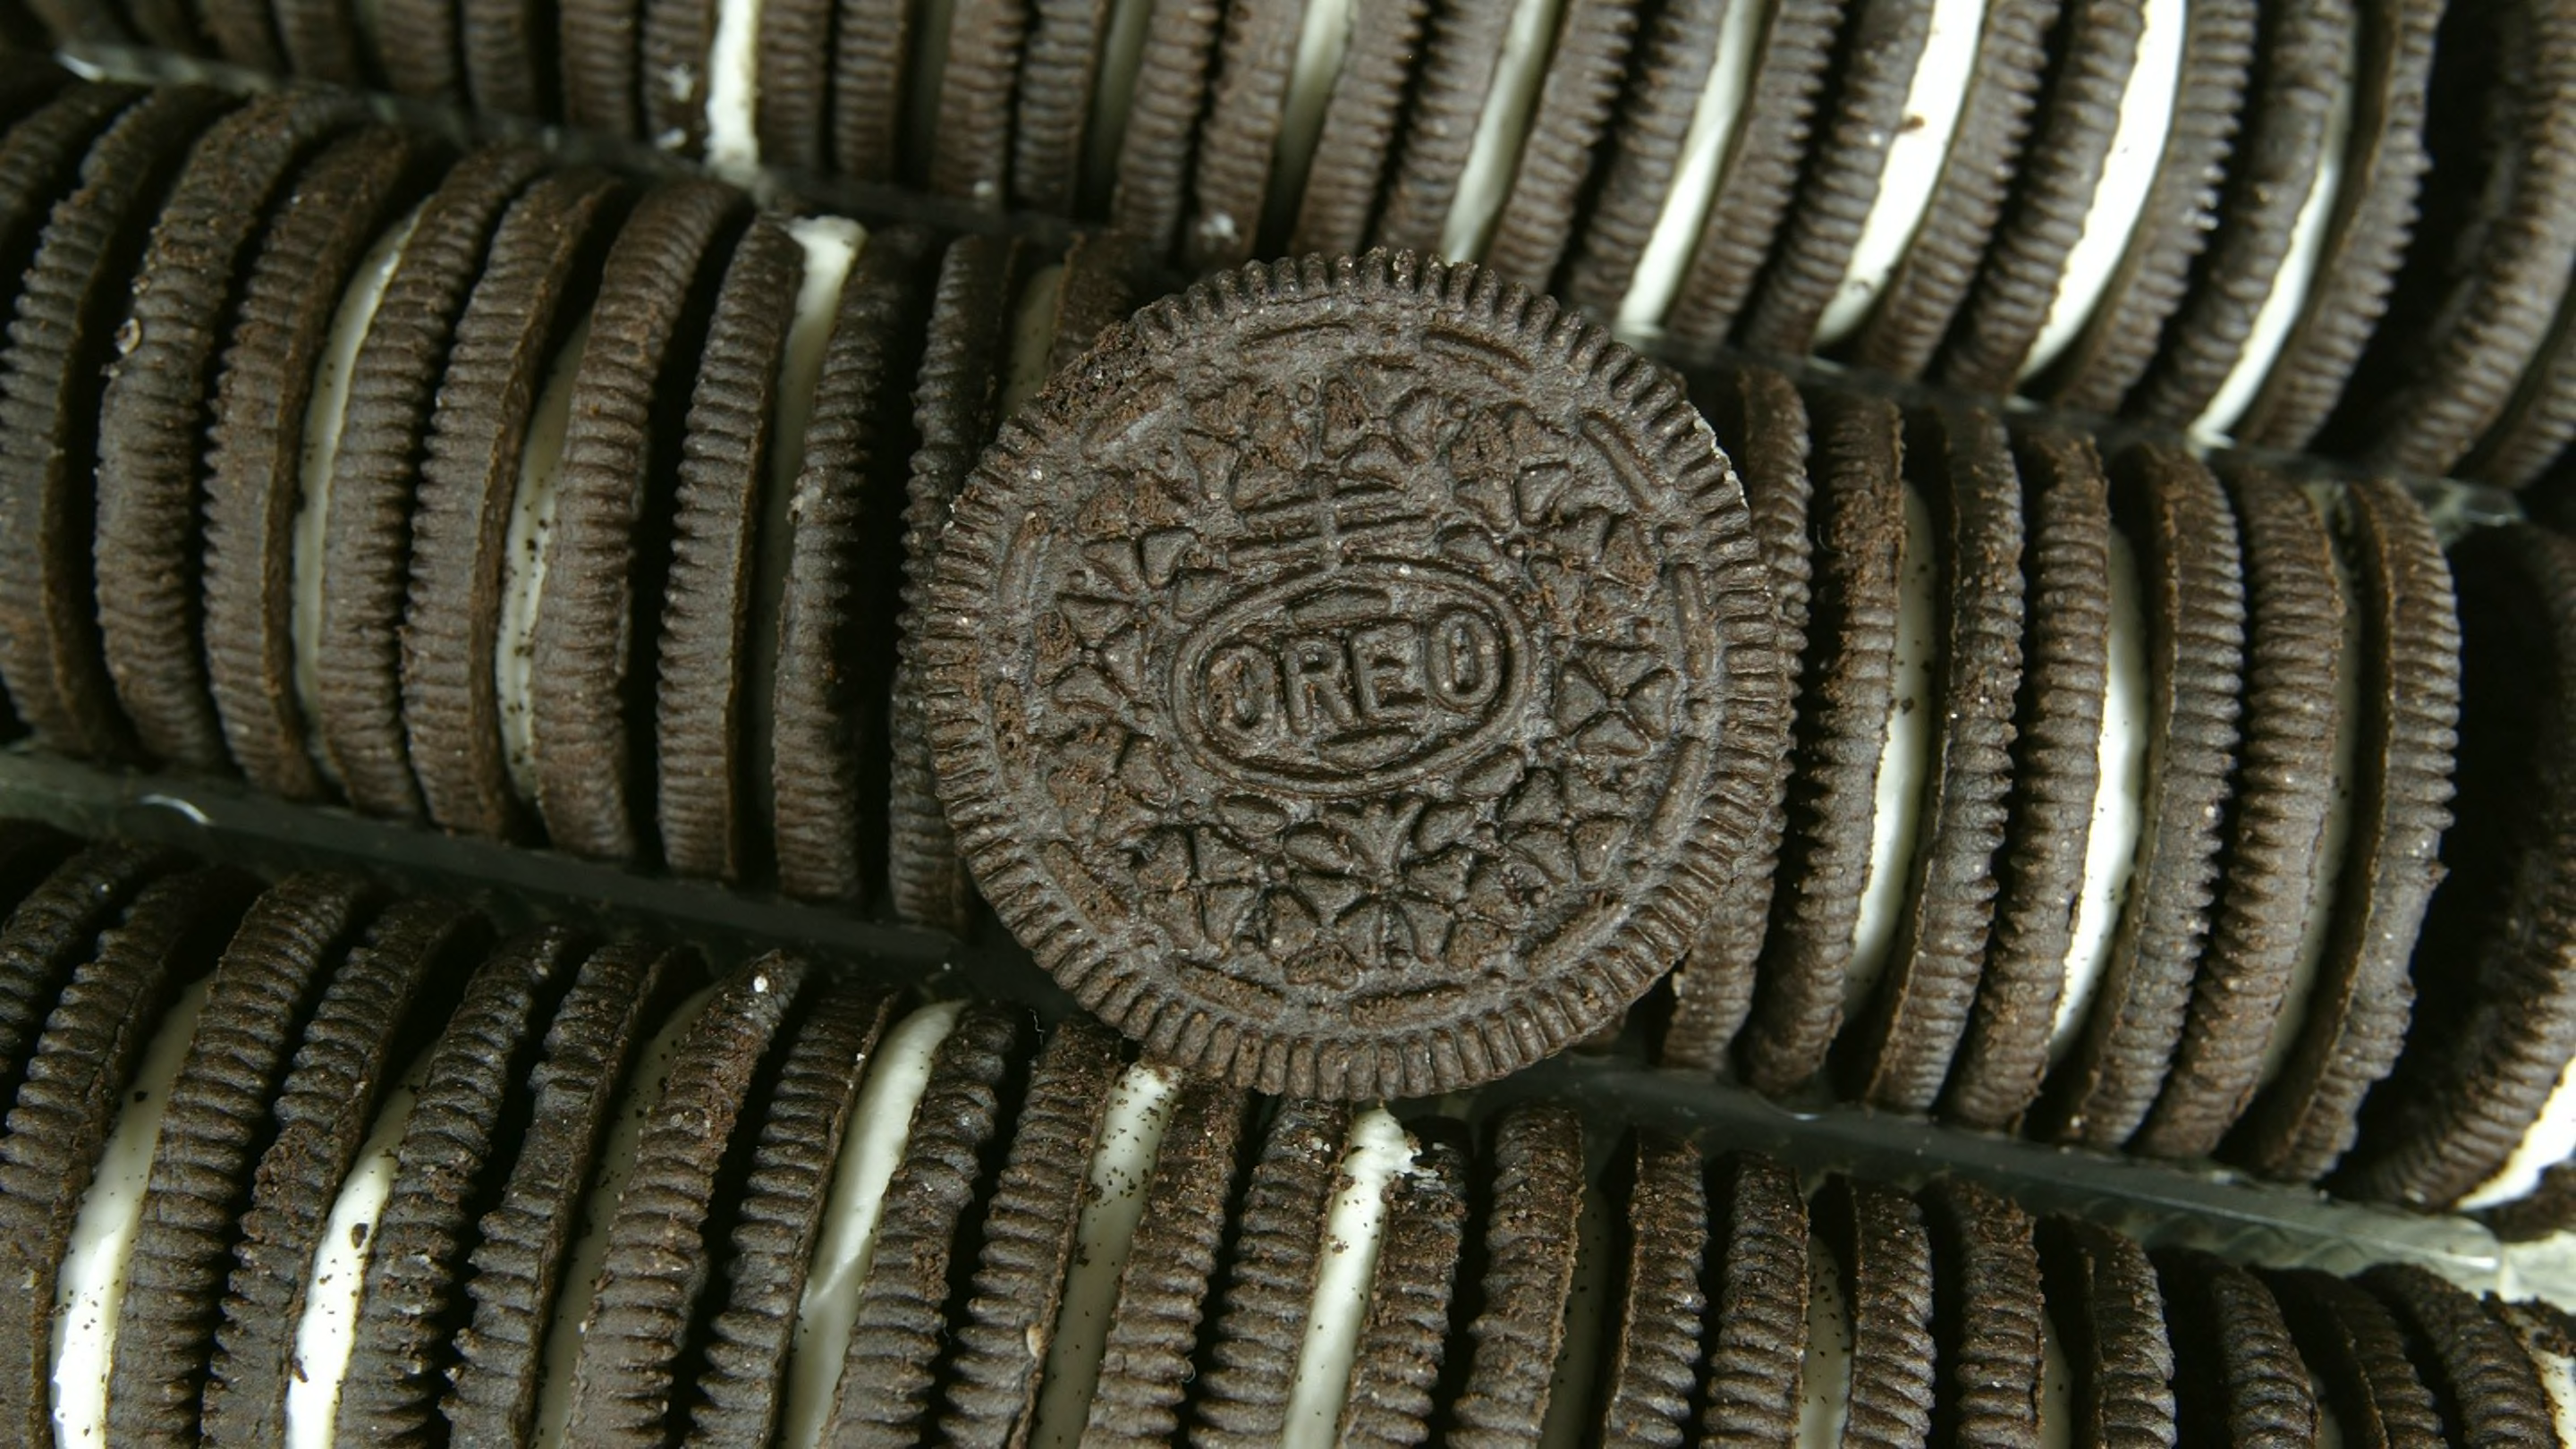 The Enduring Mystery of the Oreo Cookie Design